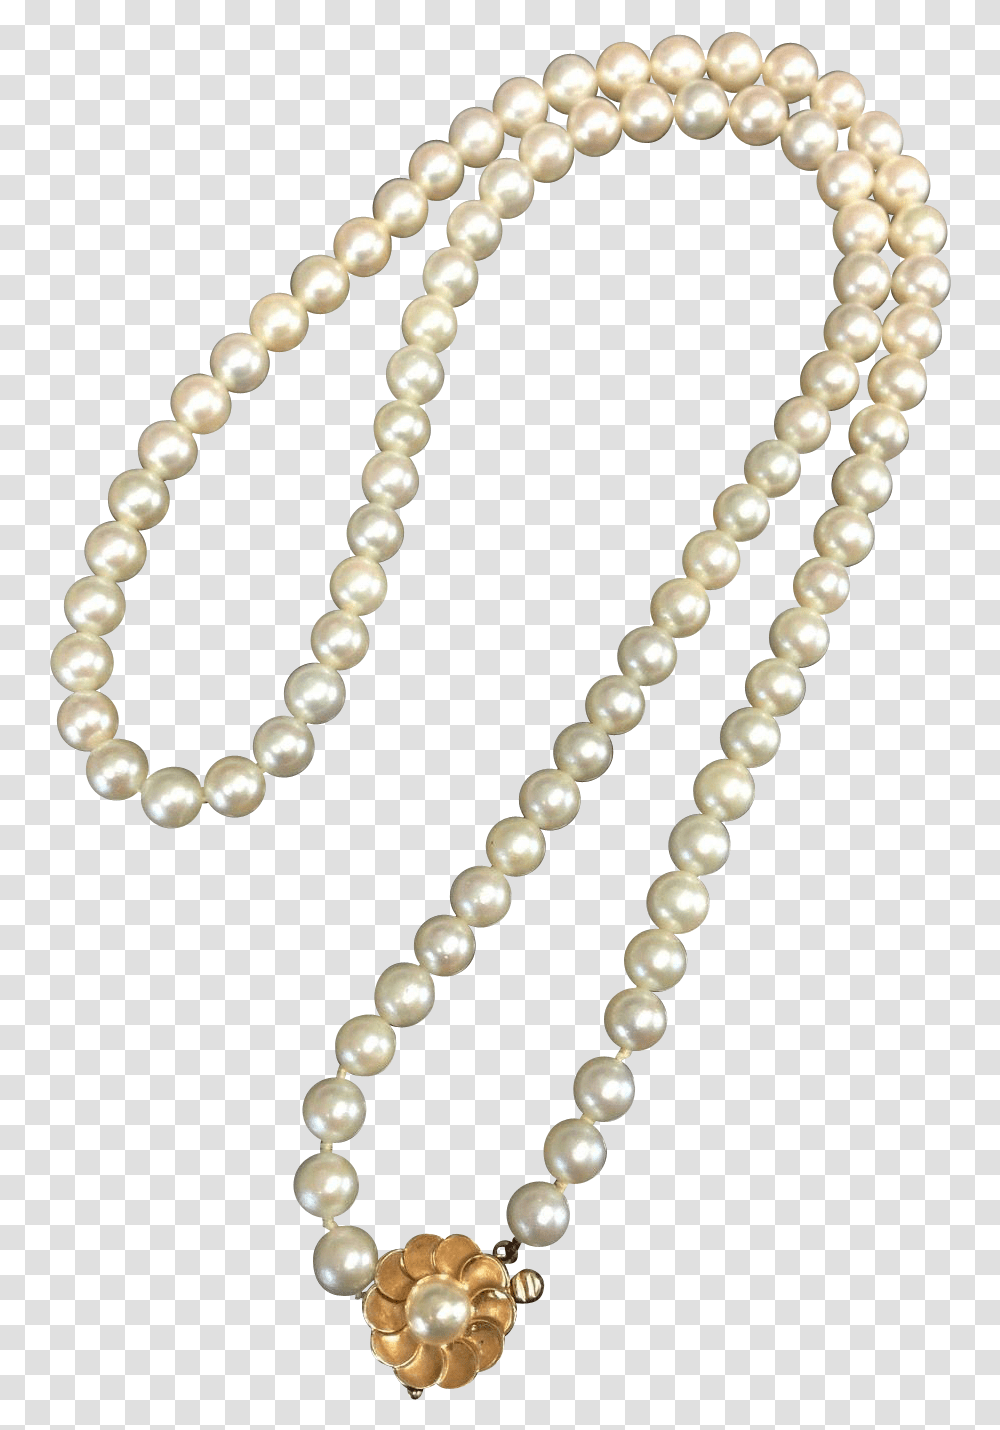 String Of Pearls, Jewelry, Accessories, Accessory, Necklace Transparent Png